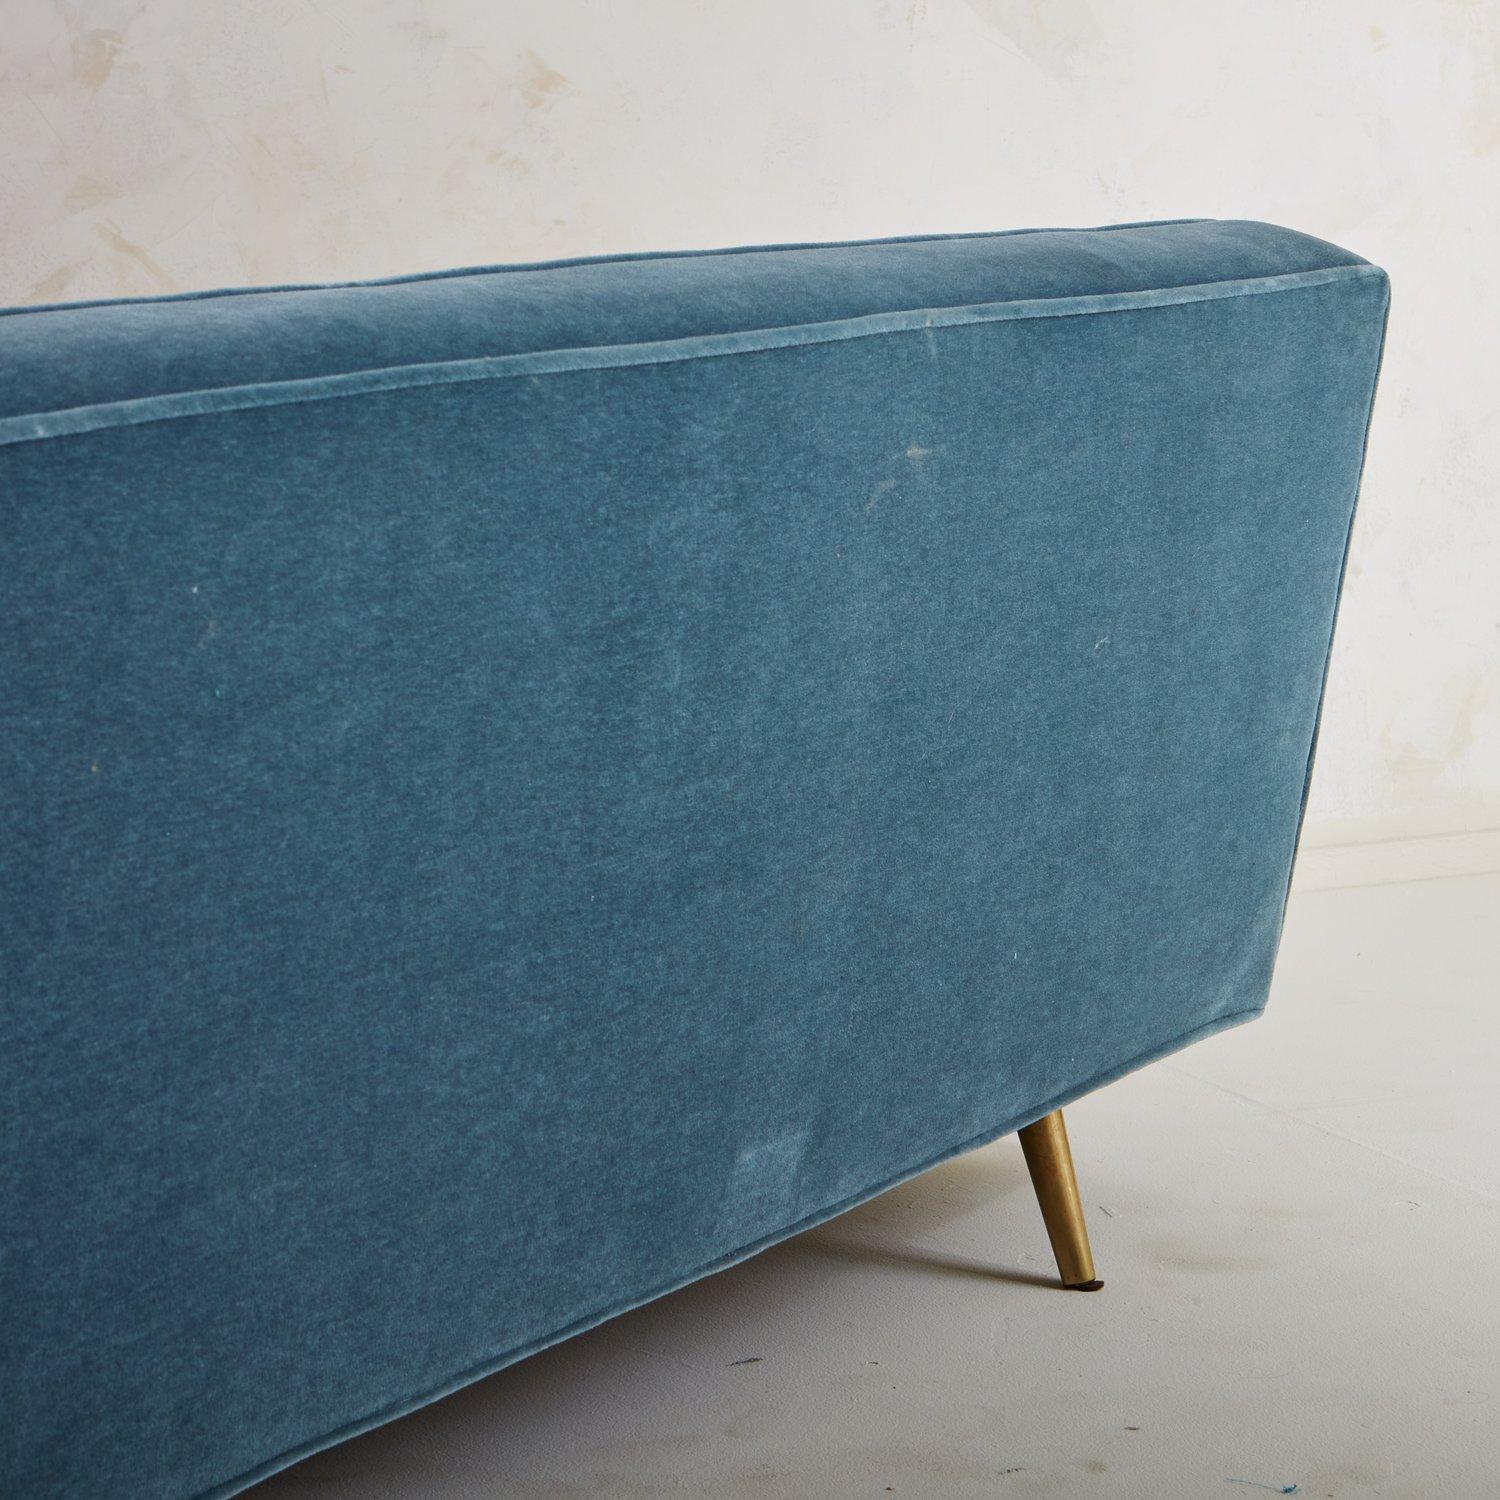 Tufted Sofa in Blue Mohair Attributed to Edward Wormley for Dunbar, USA 1950s For Sale 7